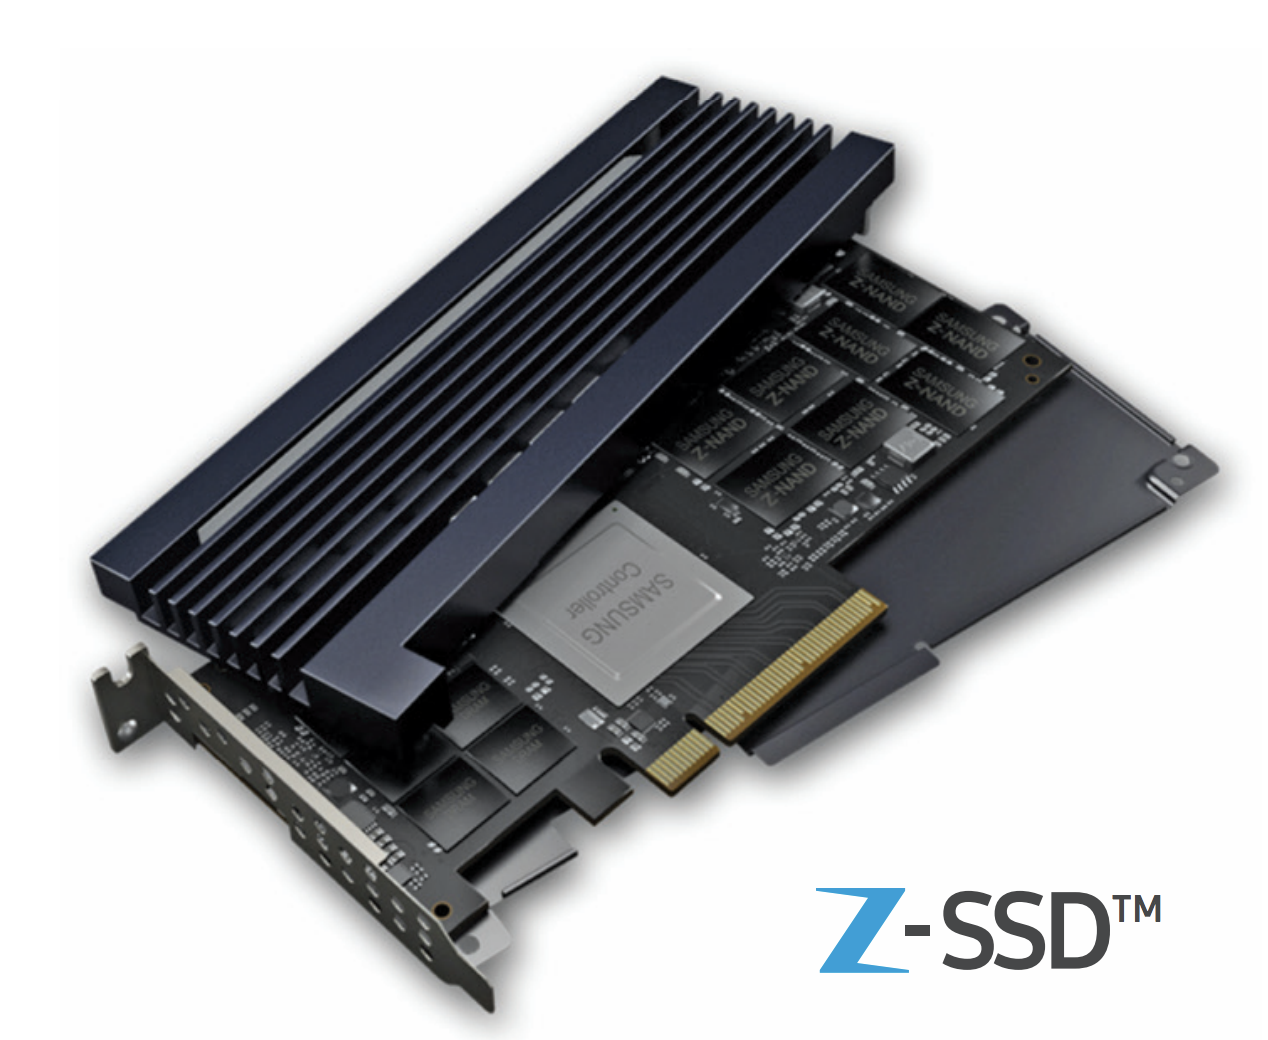 Samsung Discusses the Z-SSD Low-latency 